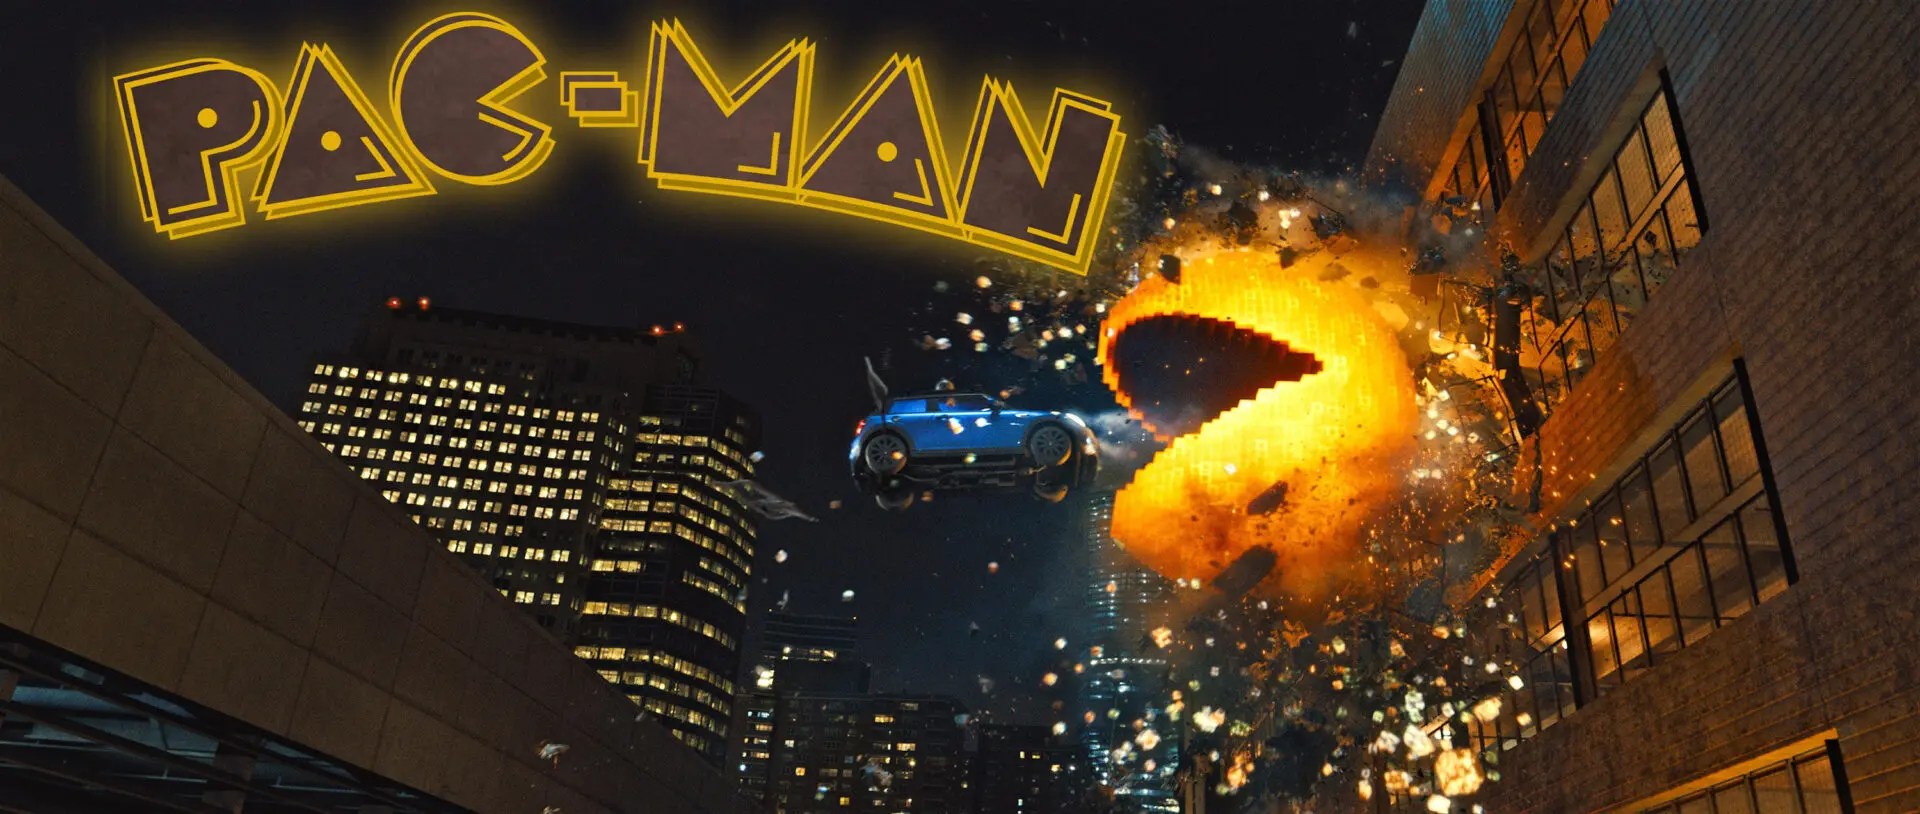 Pac man live action banner1